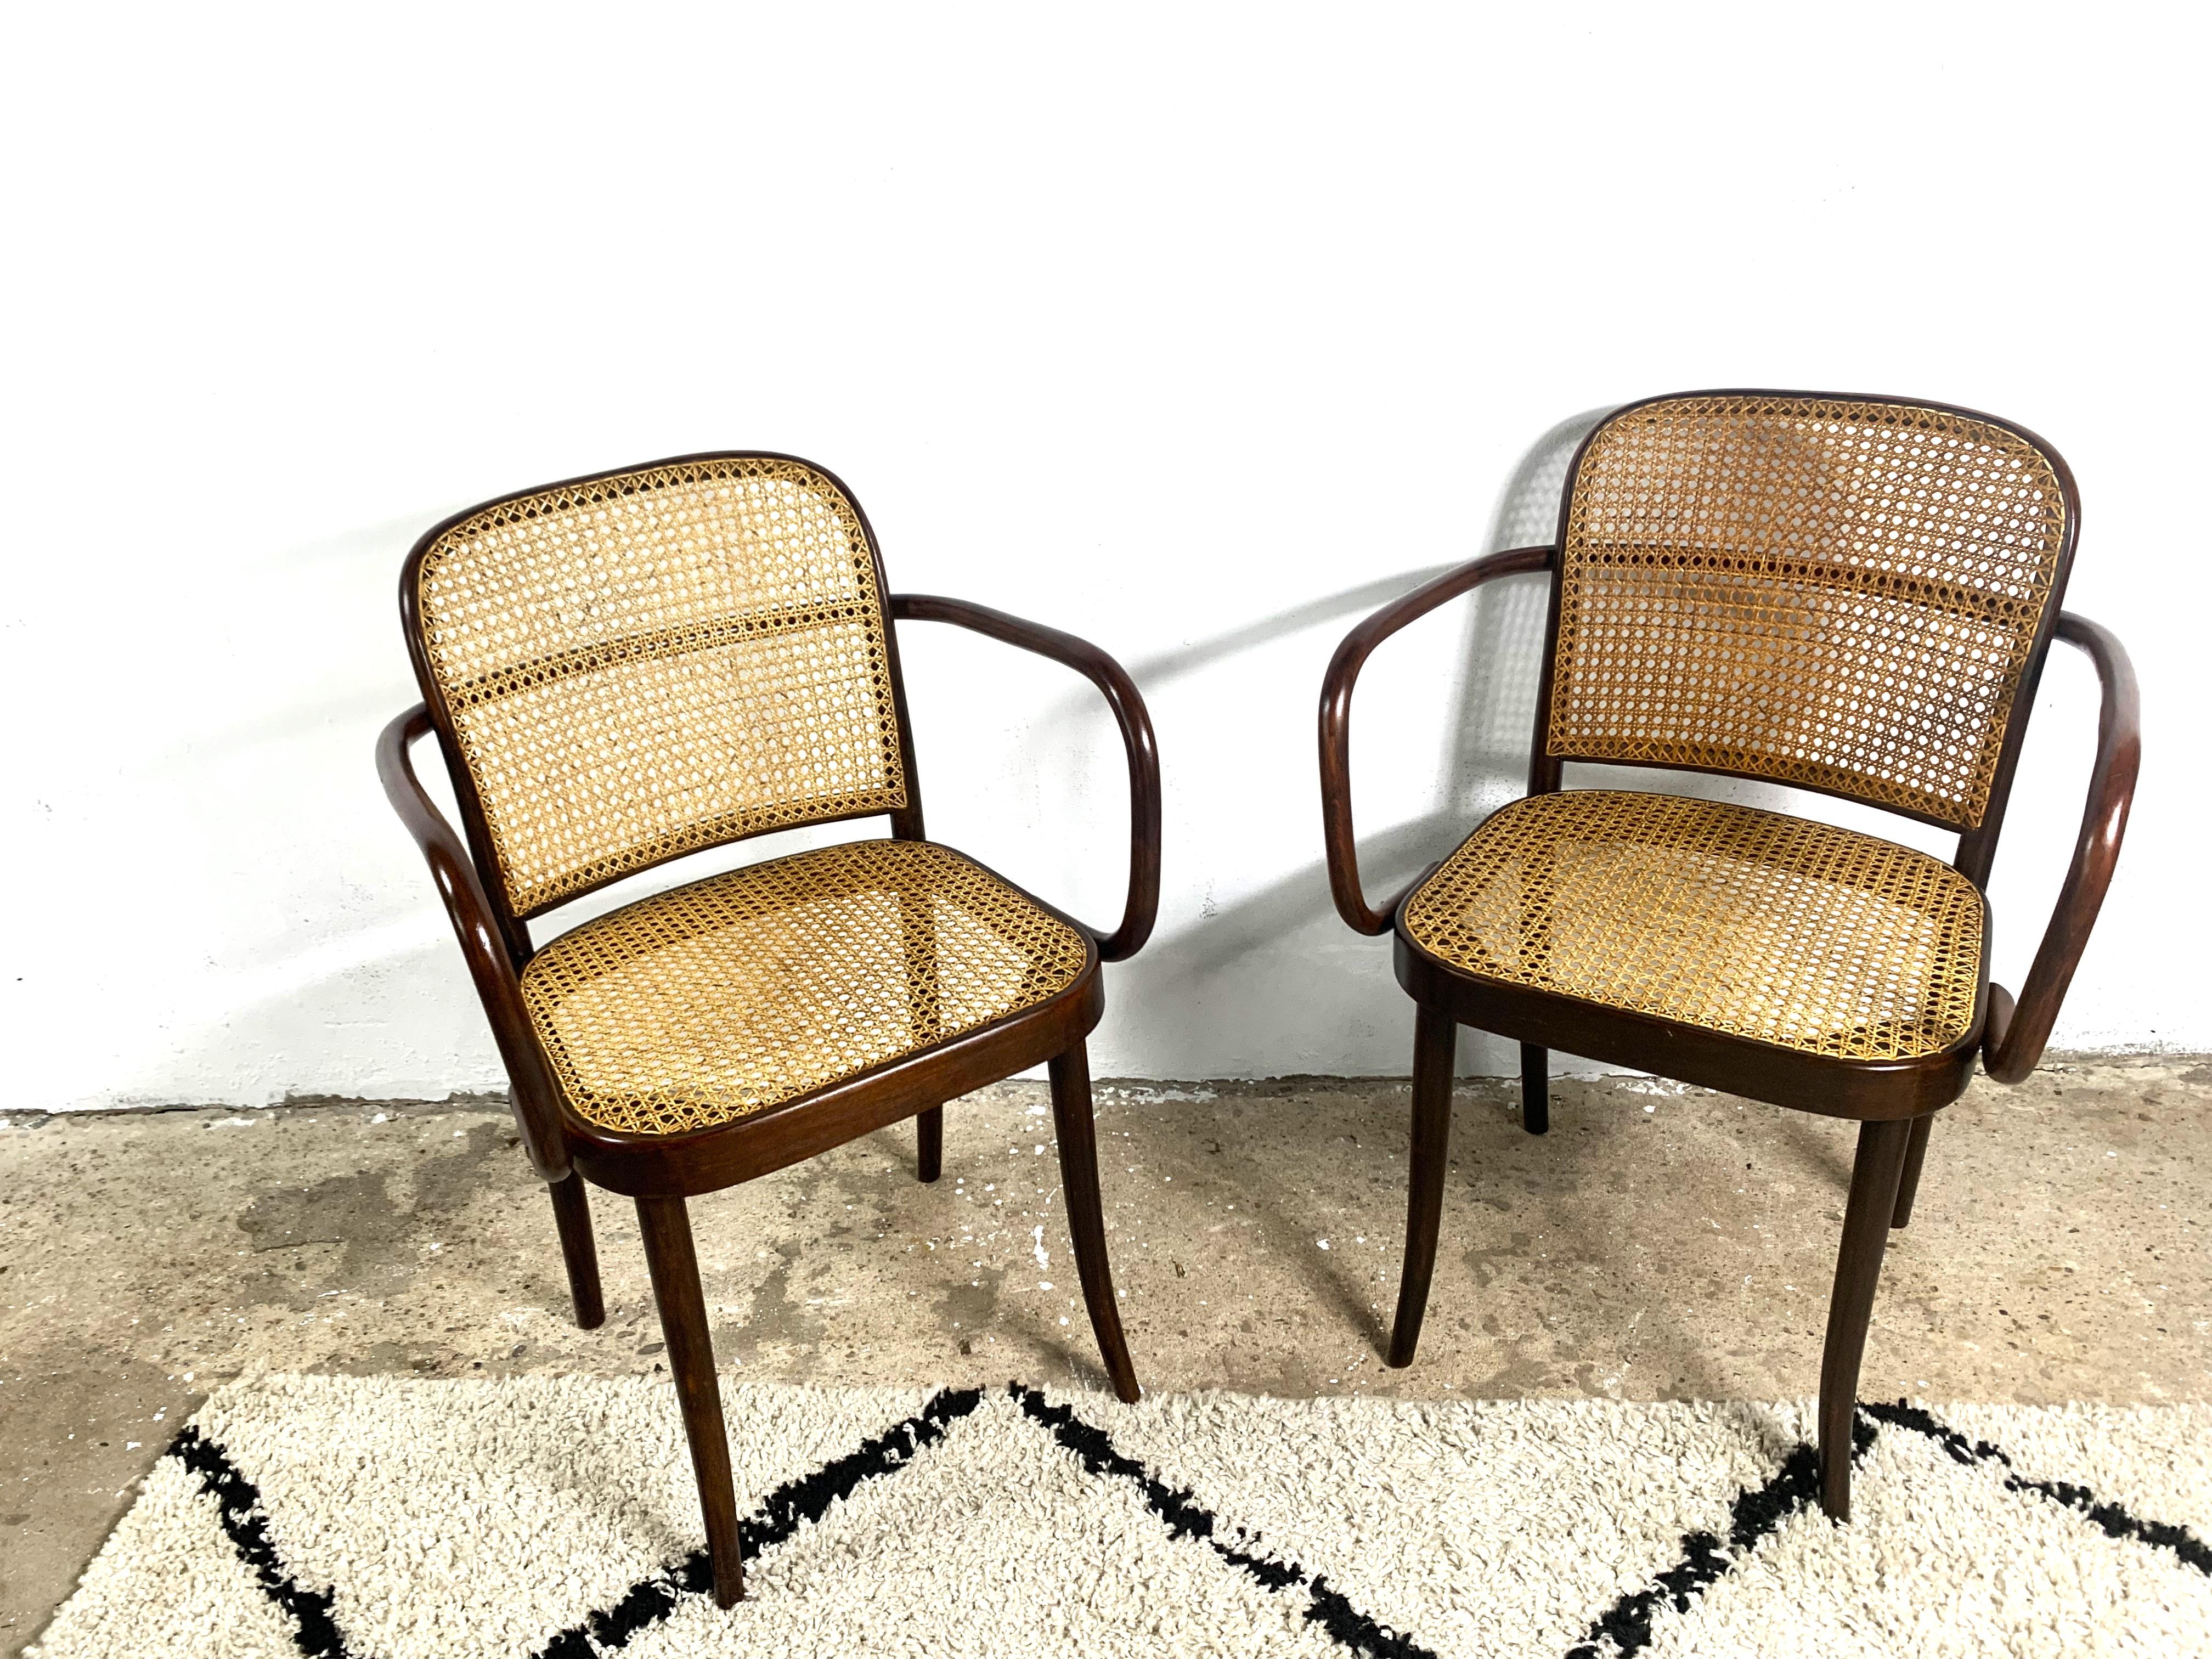 Thonet A811, 1930s, Rattan, Vintage - set of 2 For Sale 11